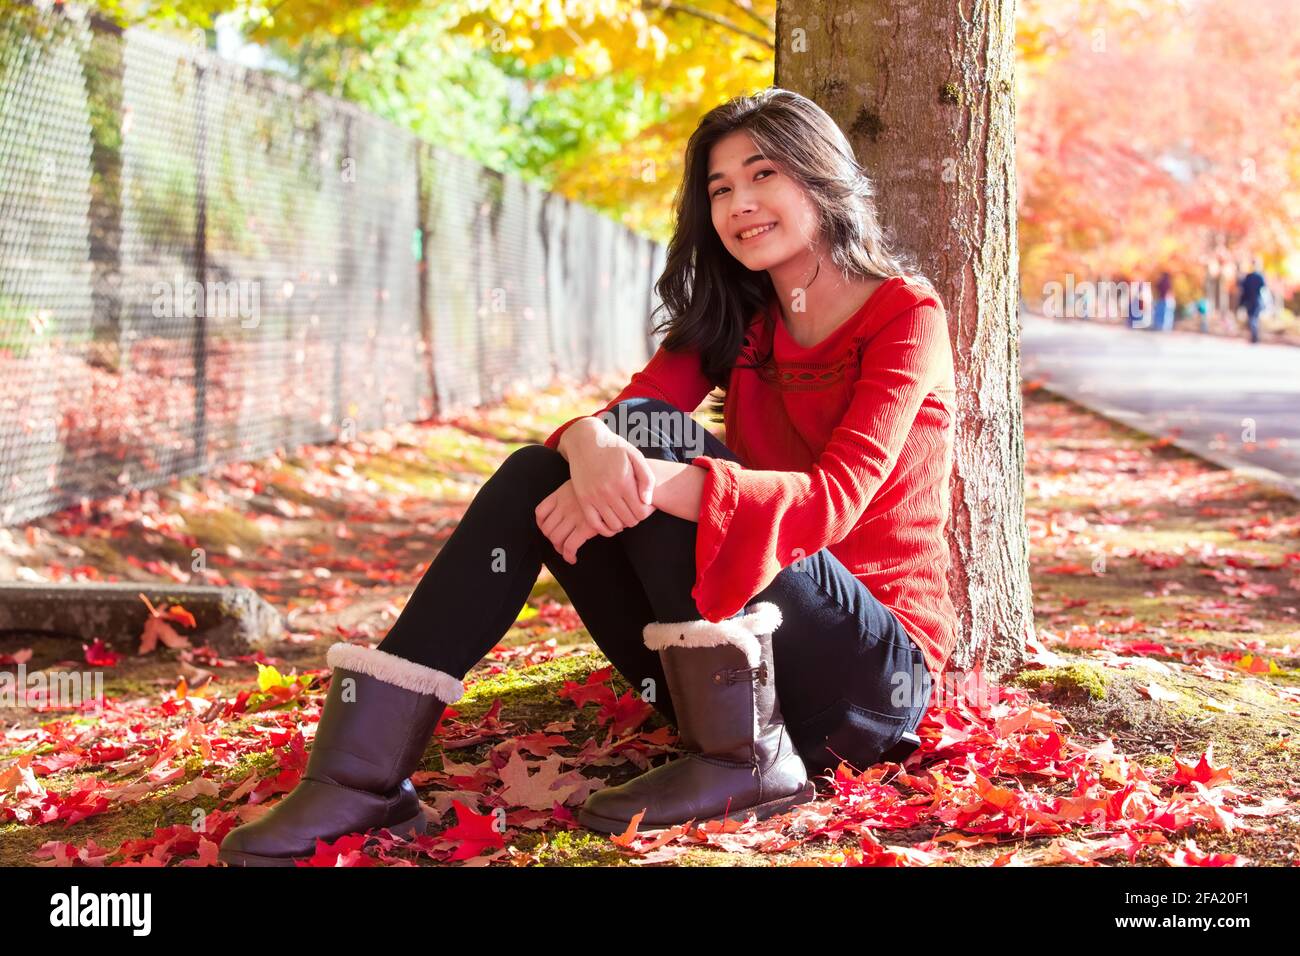 Smiling biracial teen girl in red shirt sitting under colorful autumn leaves of maple tree at park outdoors in fall season Stock Photo